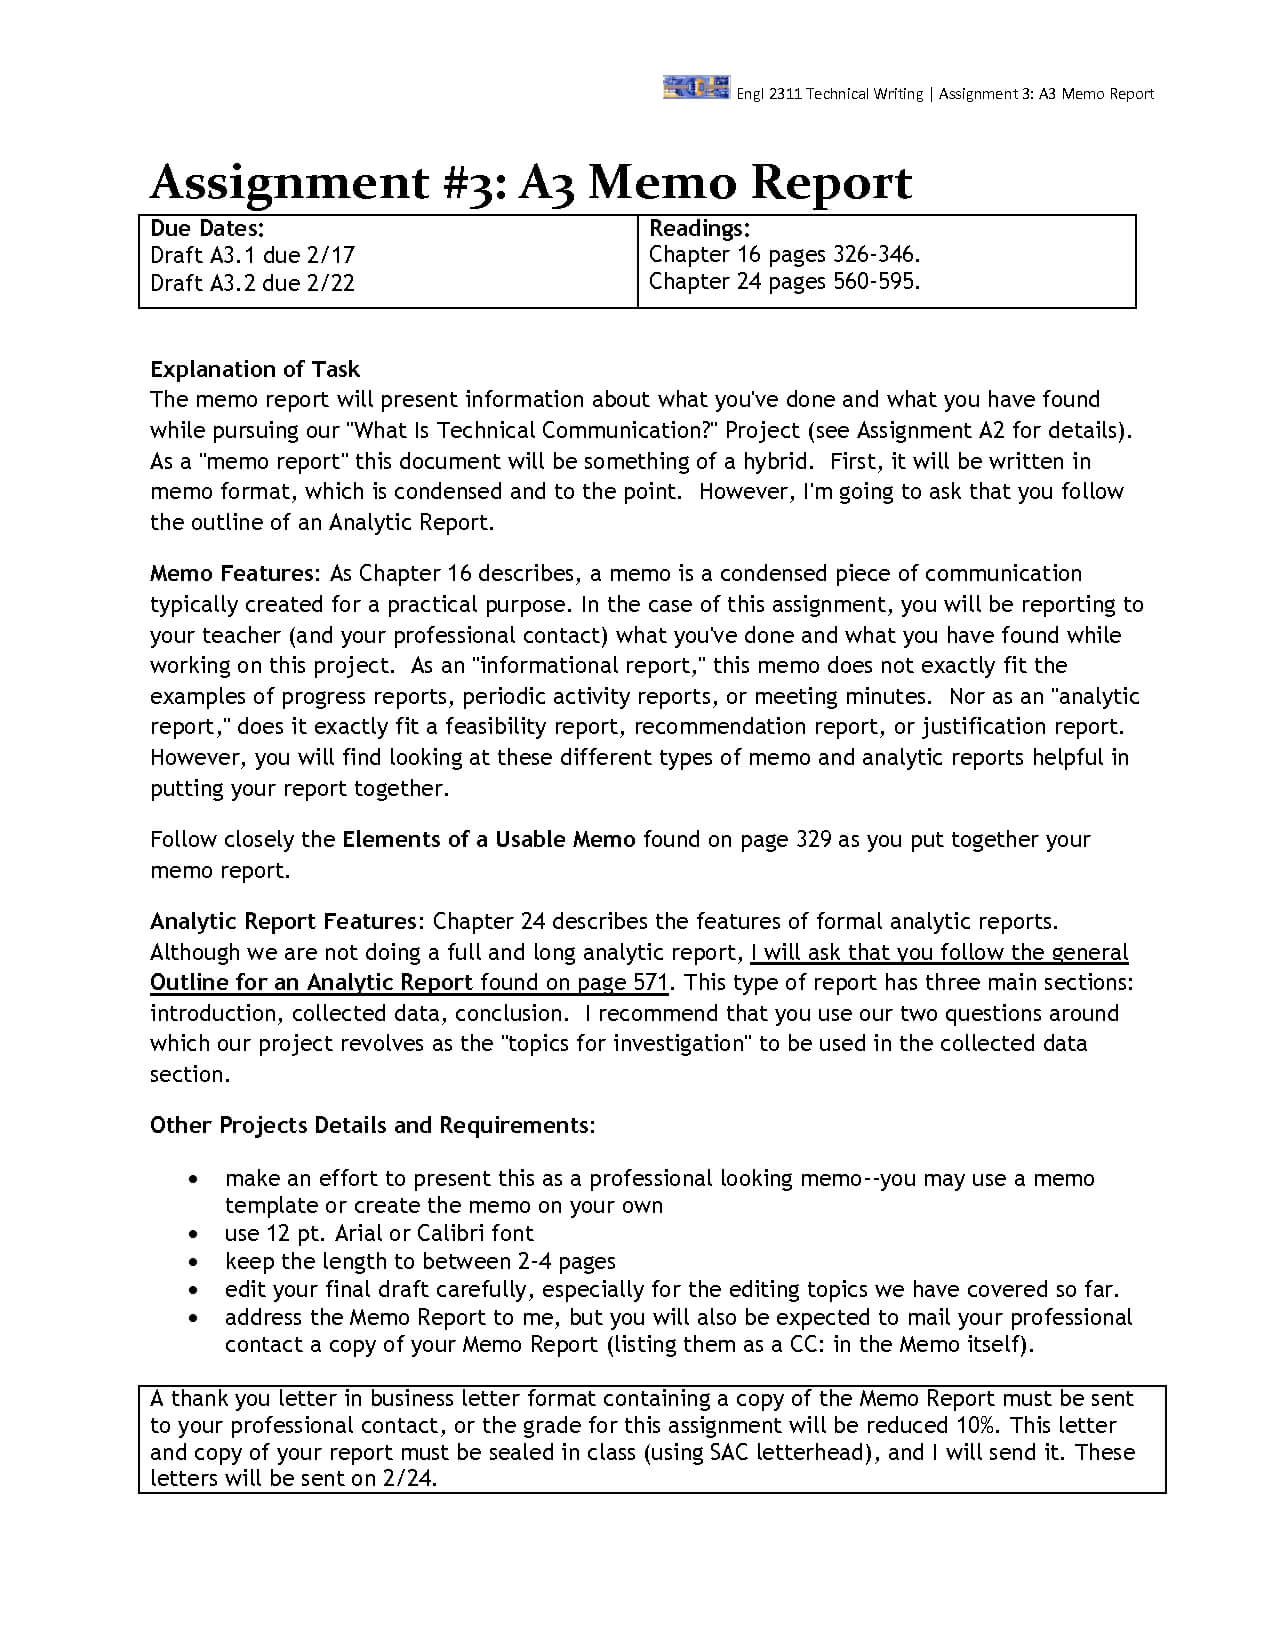 Best Photos Of Justification Recommendation Report Template For Recommendation Report Template